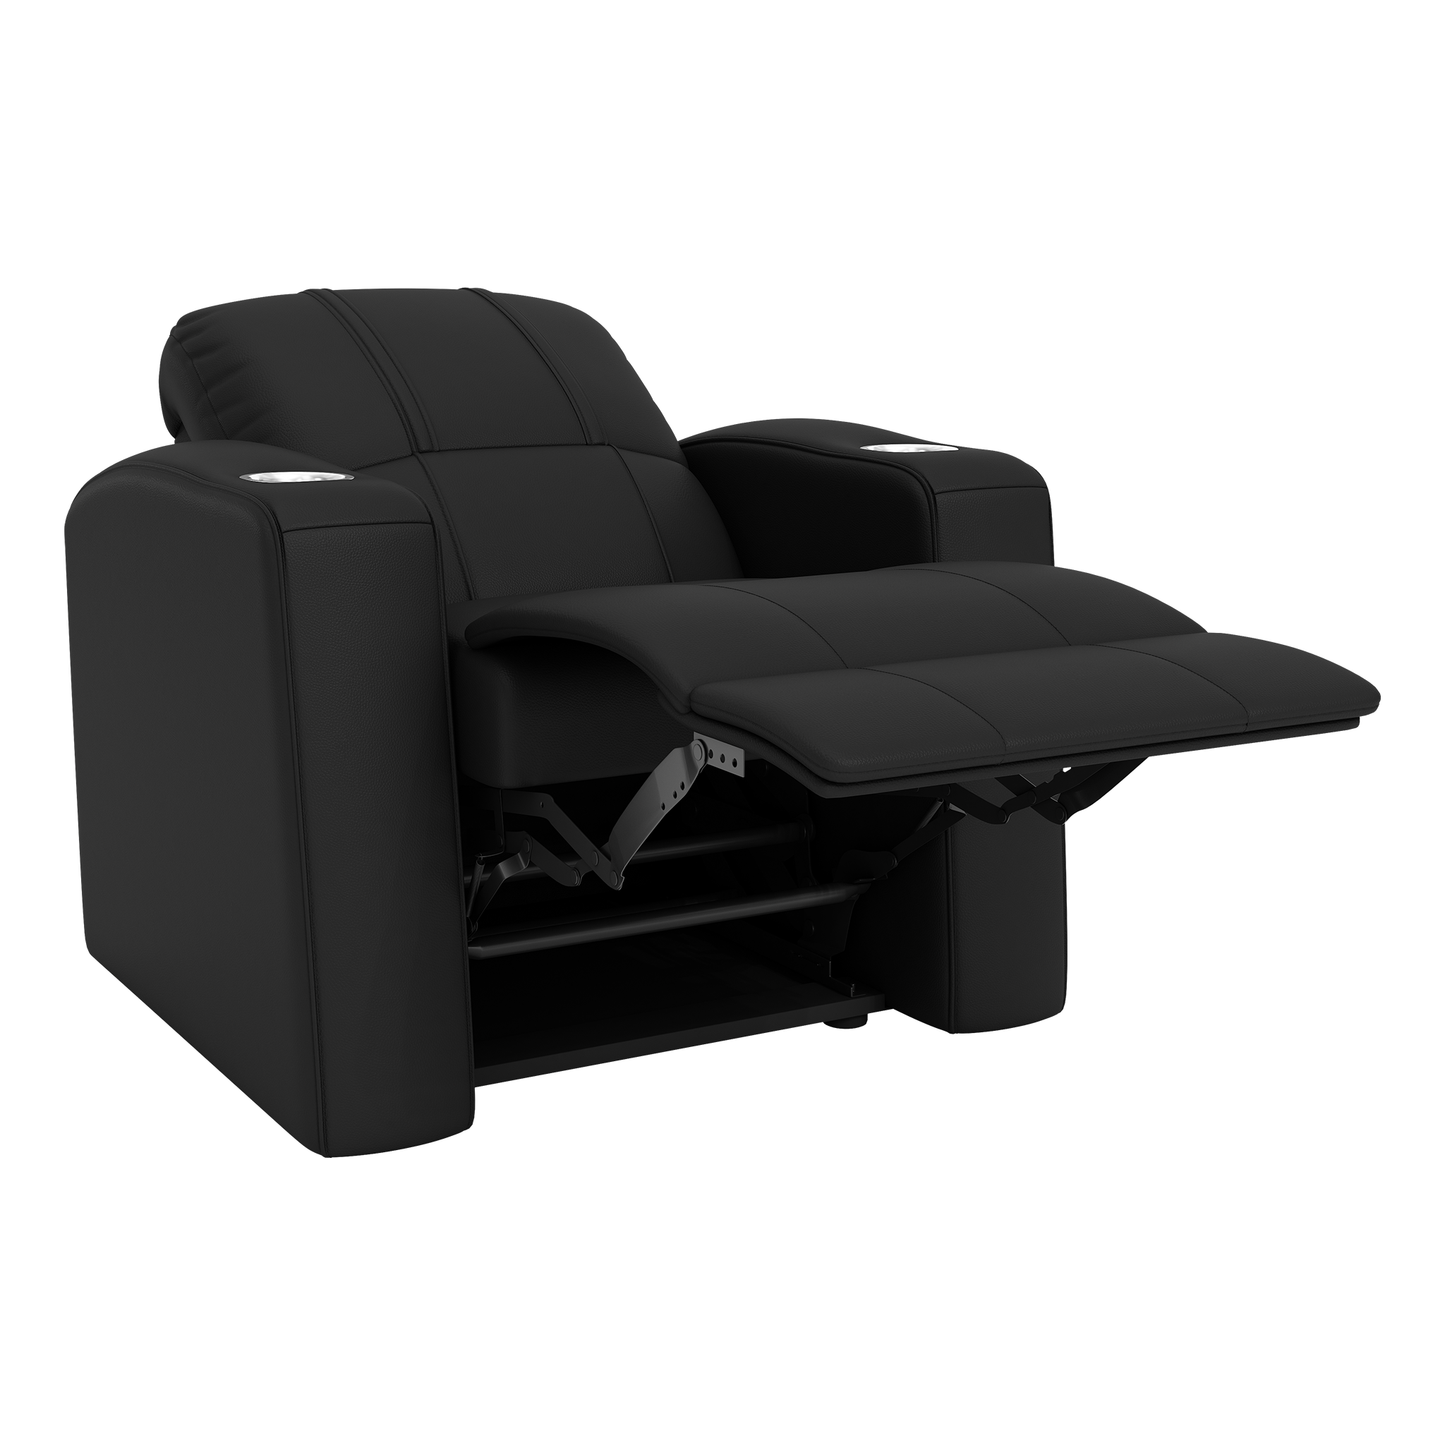 Relax Home Theater Recliner with Georgia Bulldogs Logo